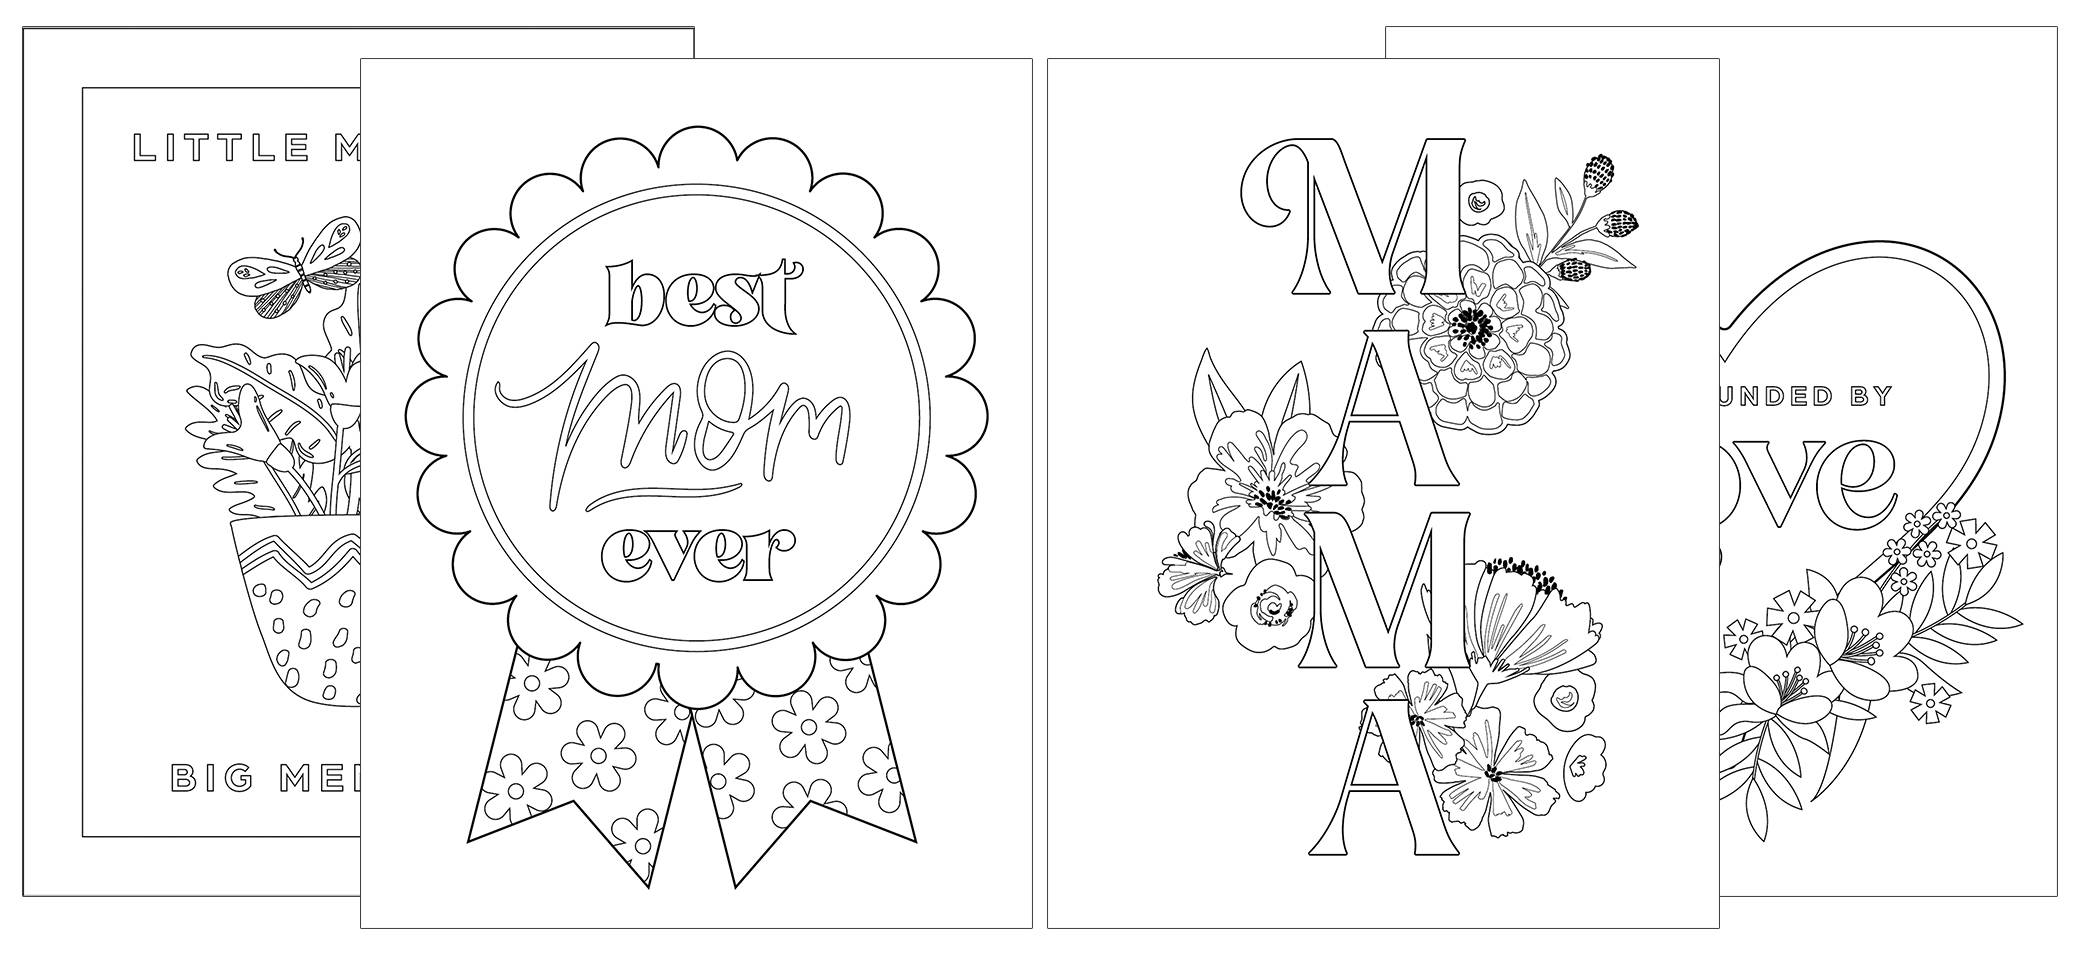 Want more happy coloring pages â the happy planner